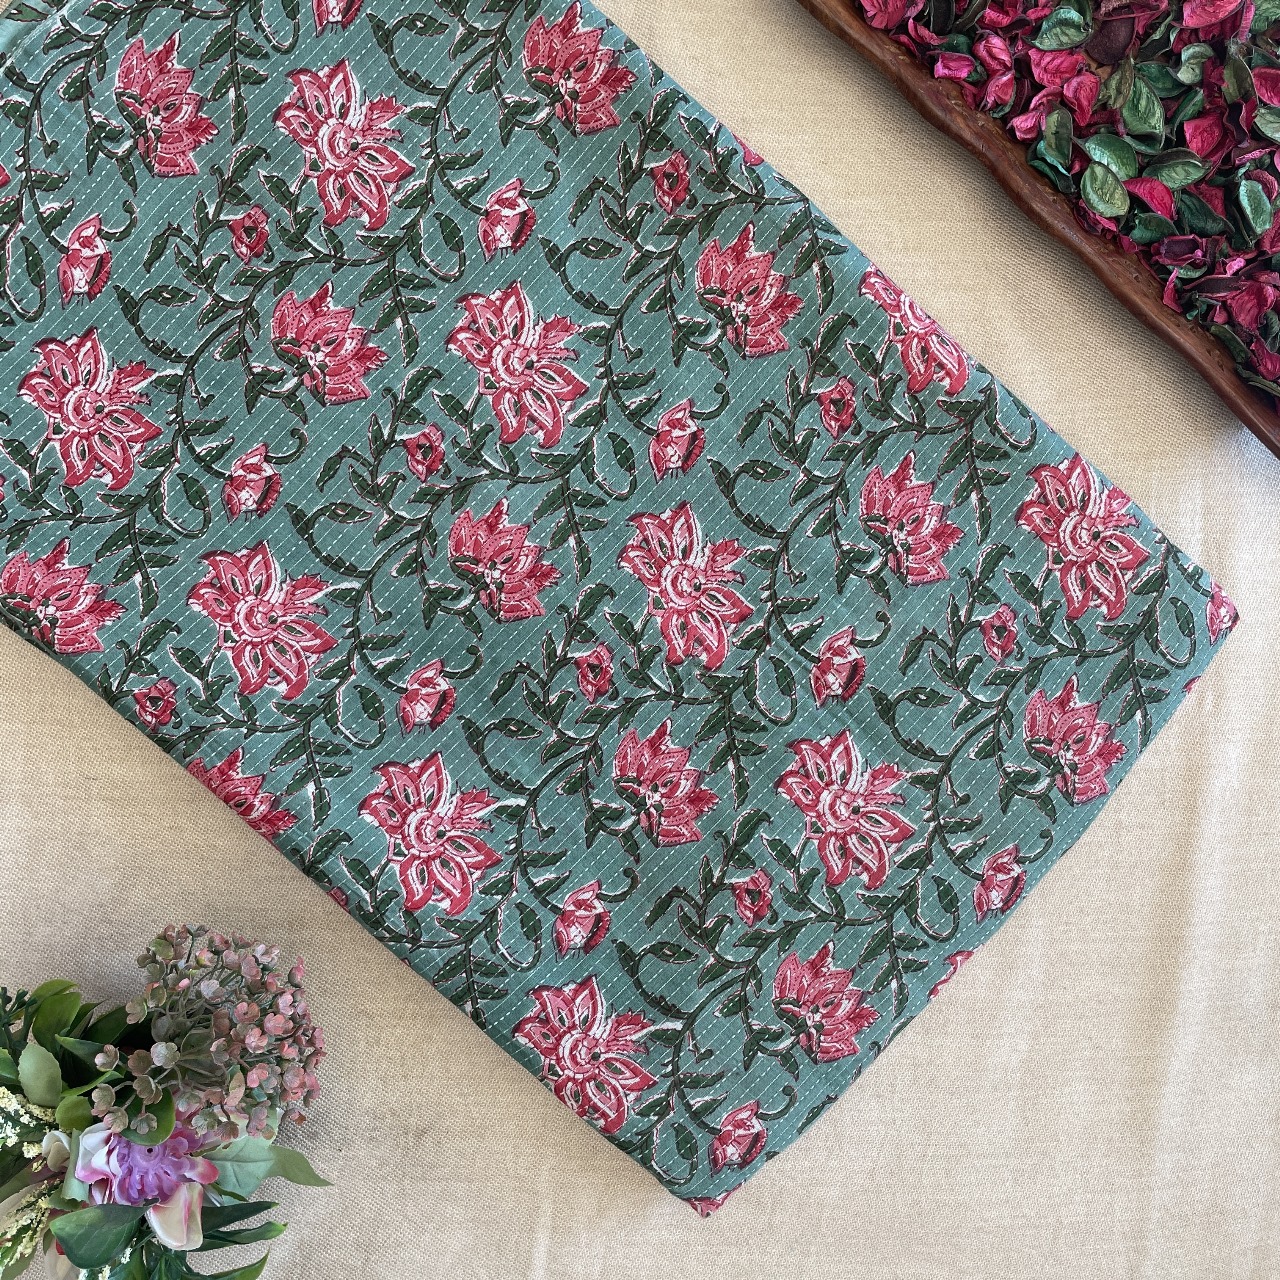 Cotton Kantha Printed Fabric - Floral - Leaves (Veli)